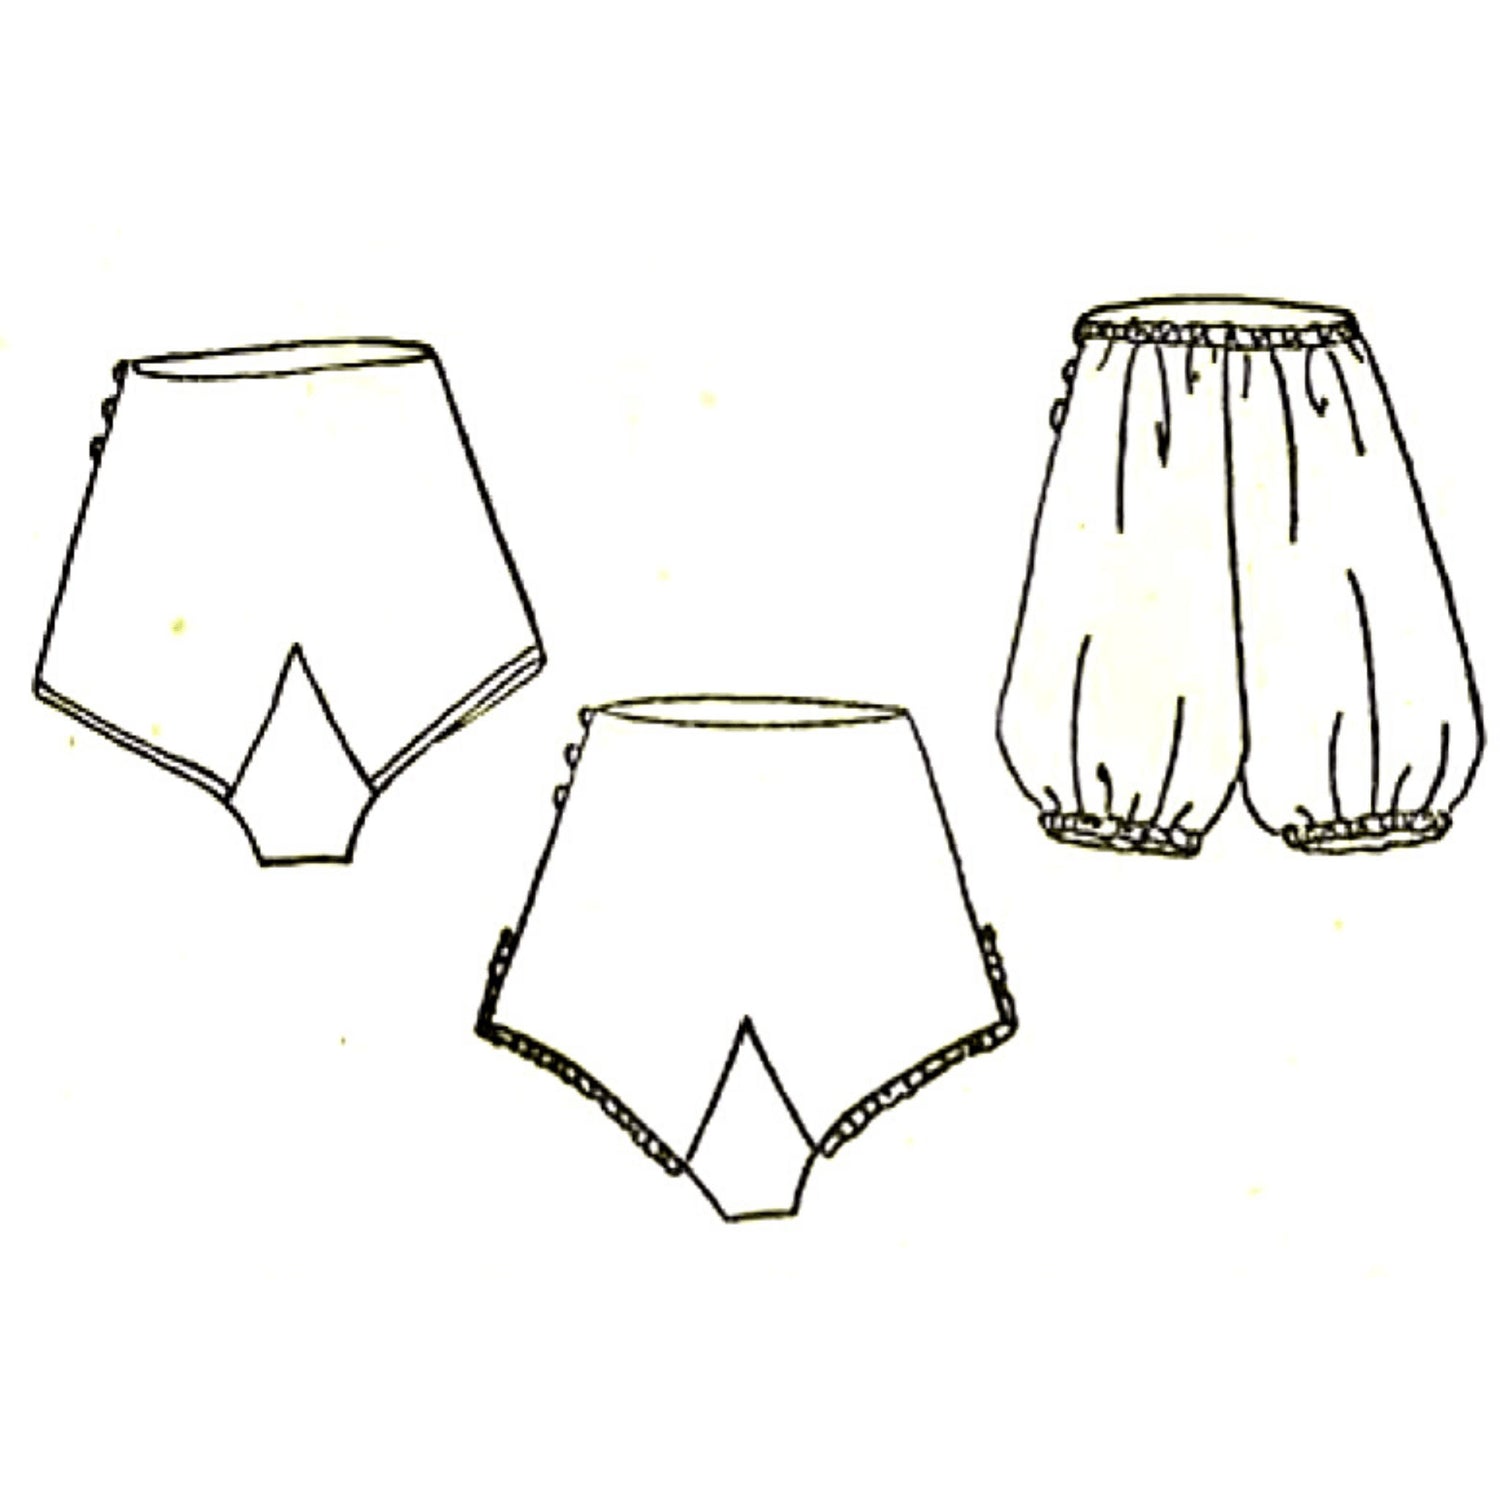 1940s Pattern, Panties & Bloomers - lined illustration